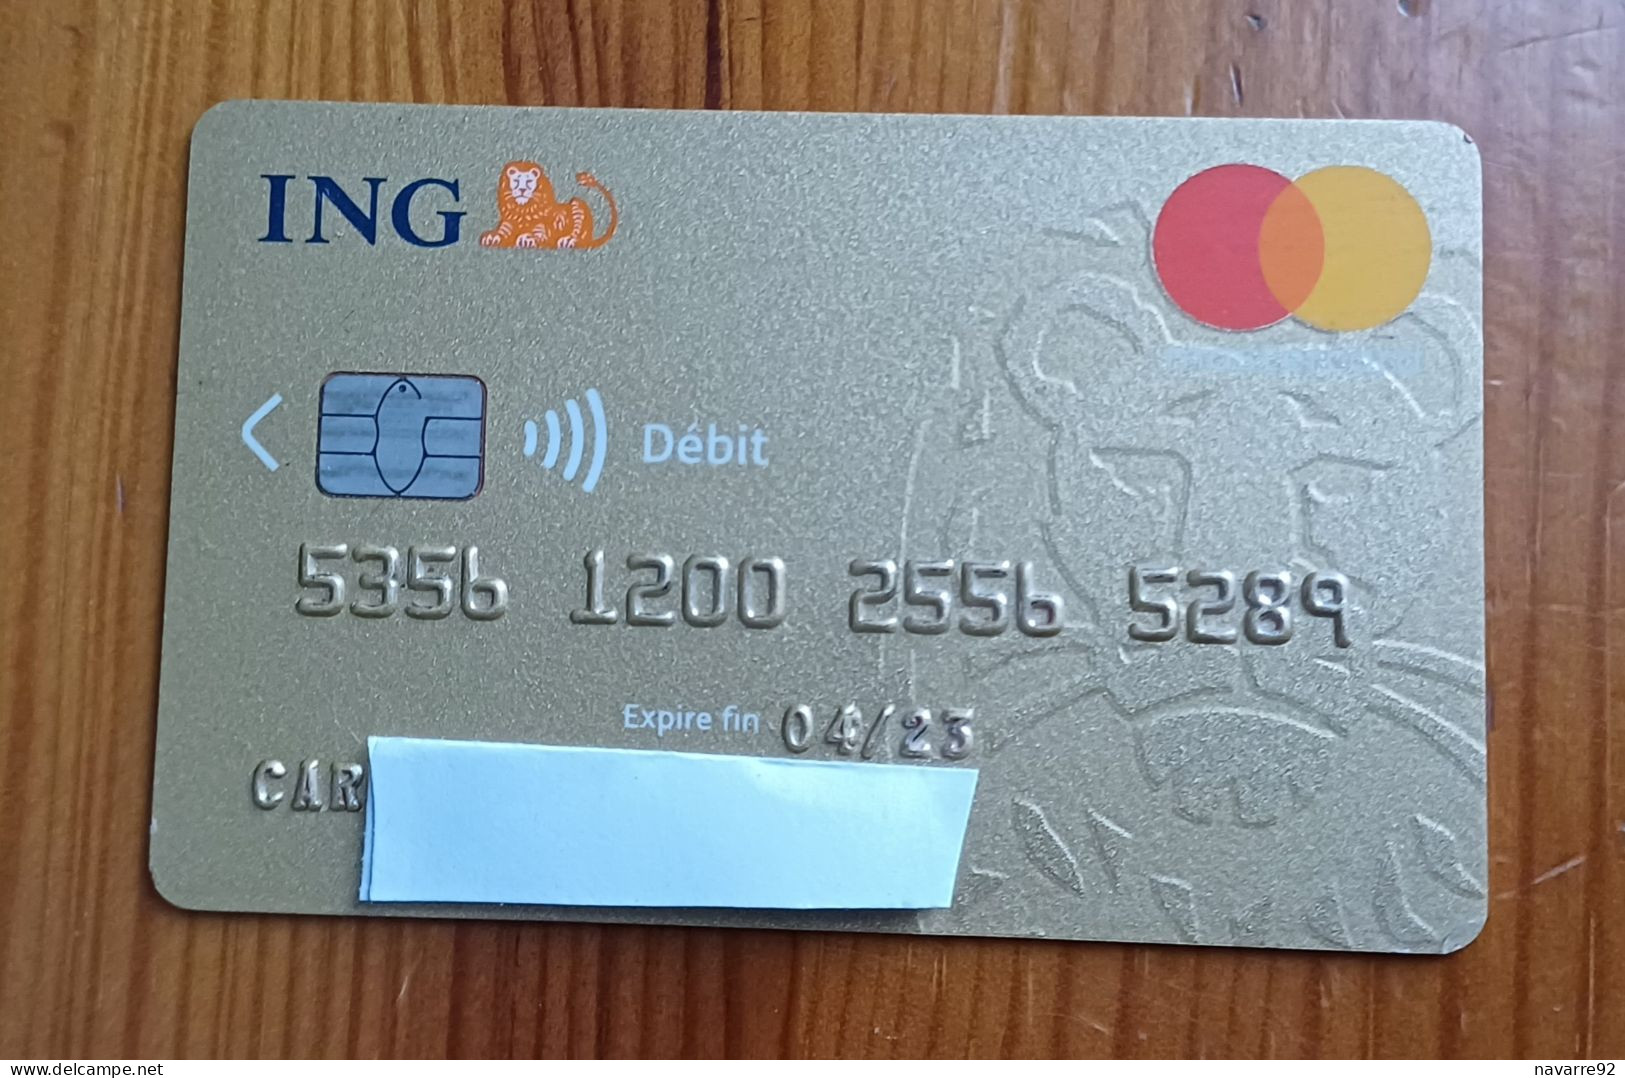 JOLIE CARTE A PUCE BANCAIRE PERIMEE ING !!! - Disposable Credit Card